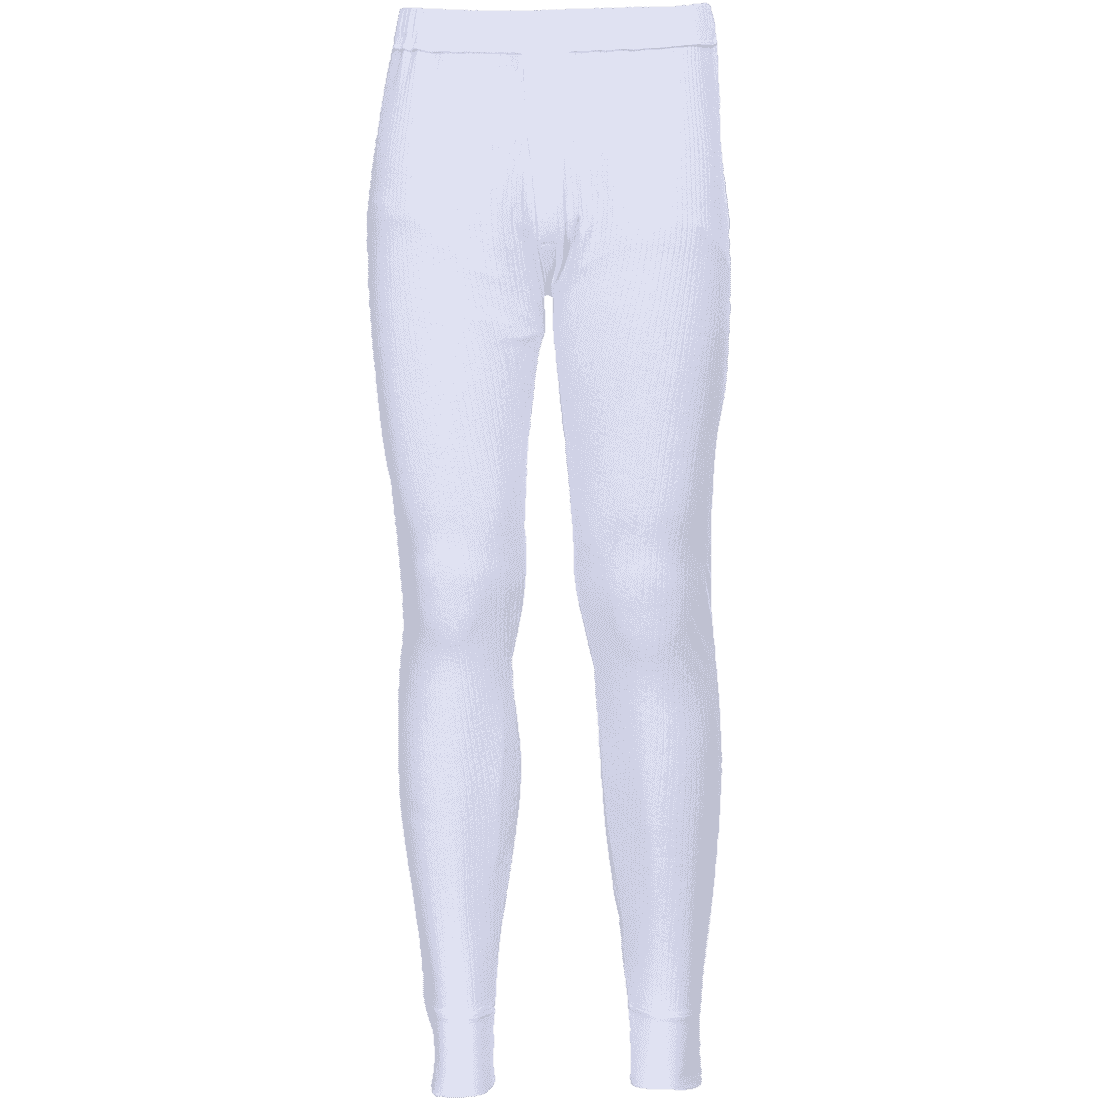 B121 Thermal Trousers Portwest White